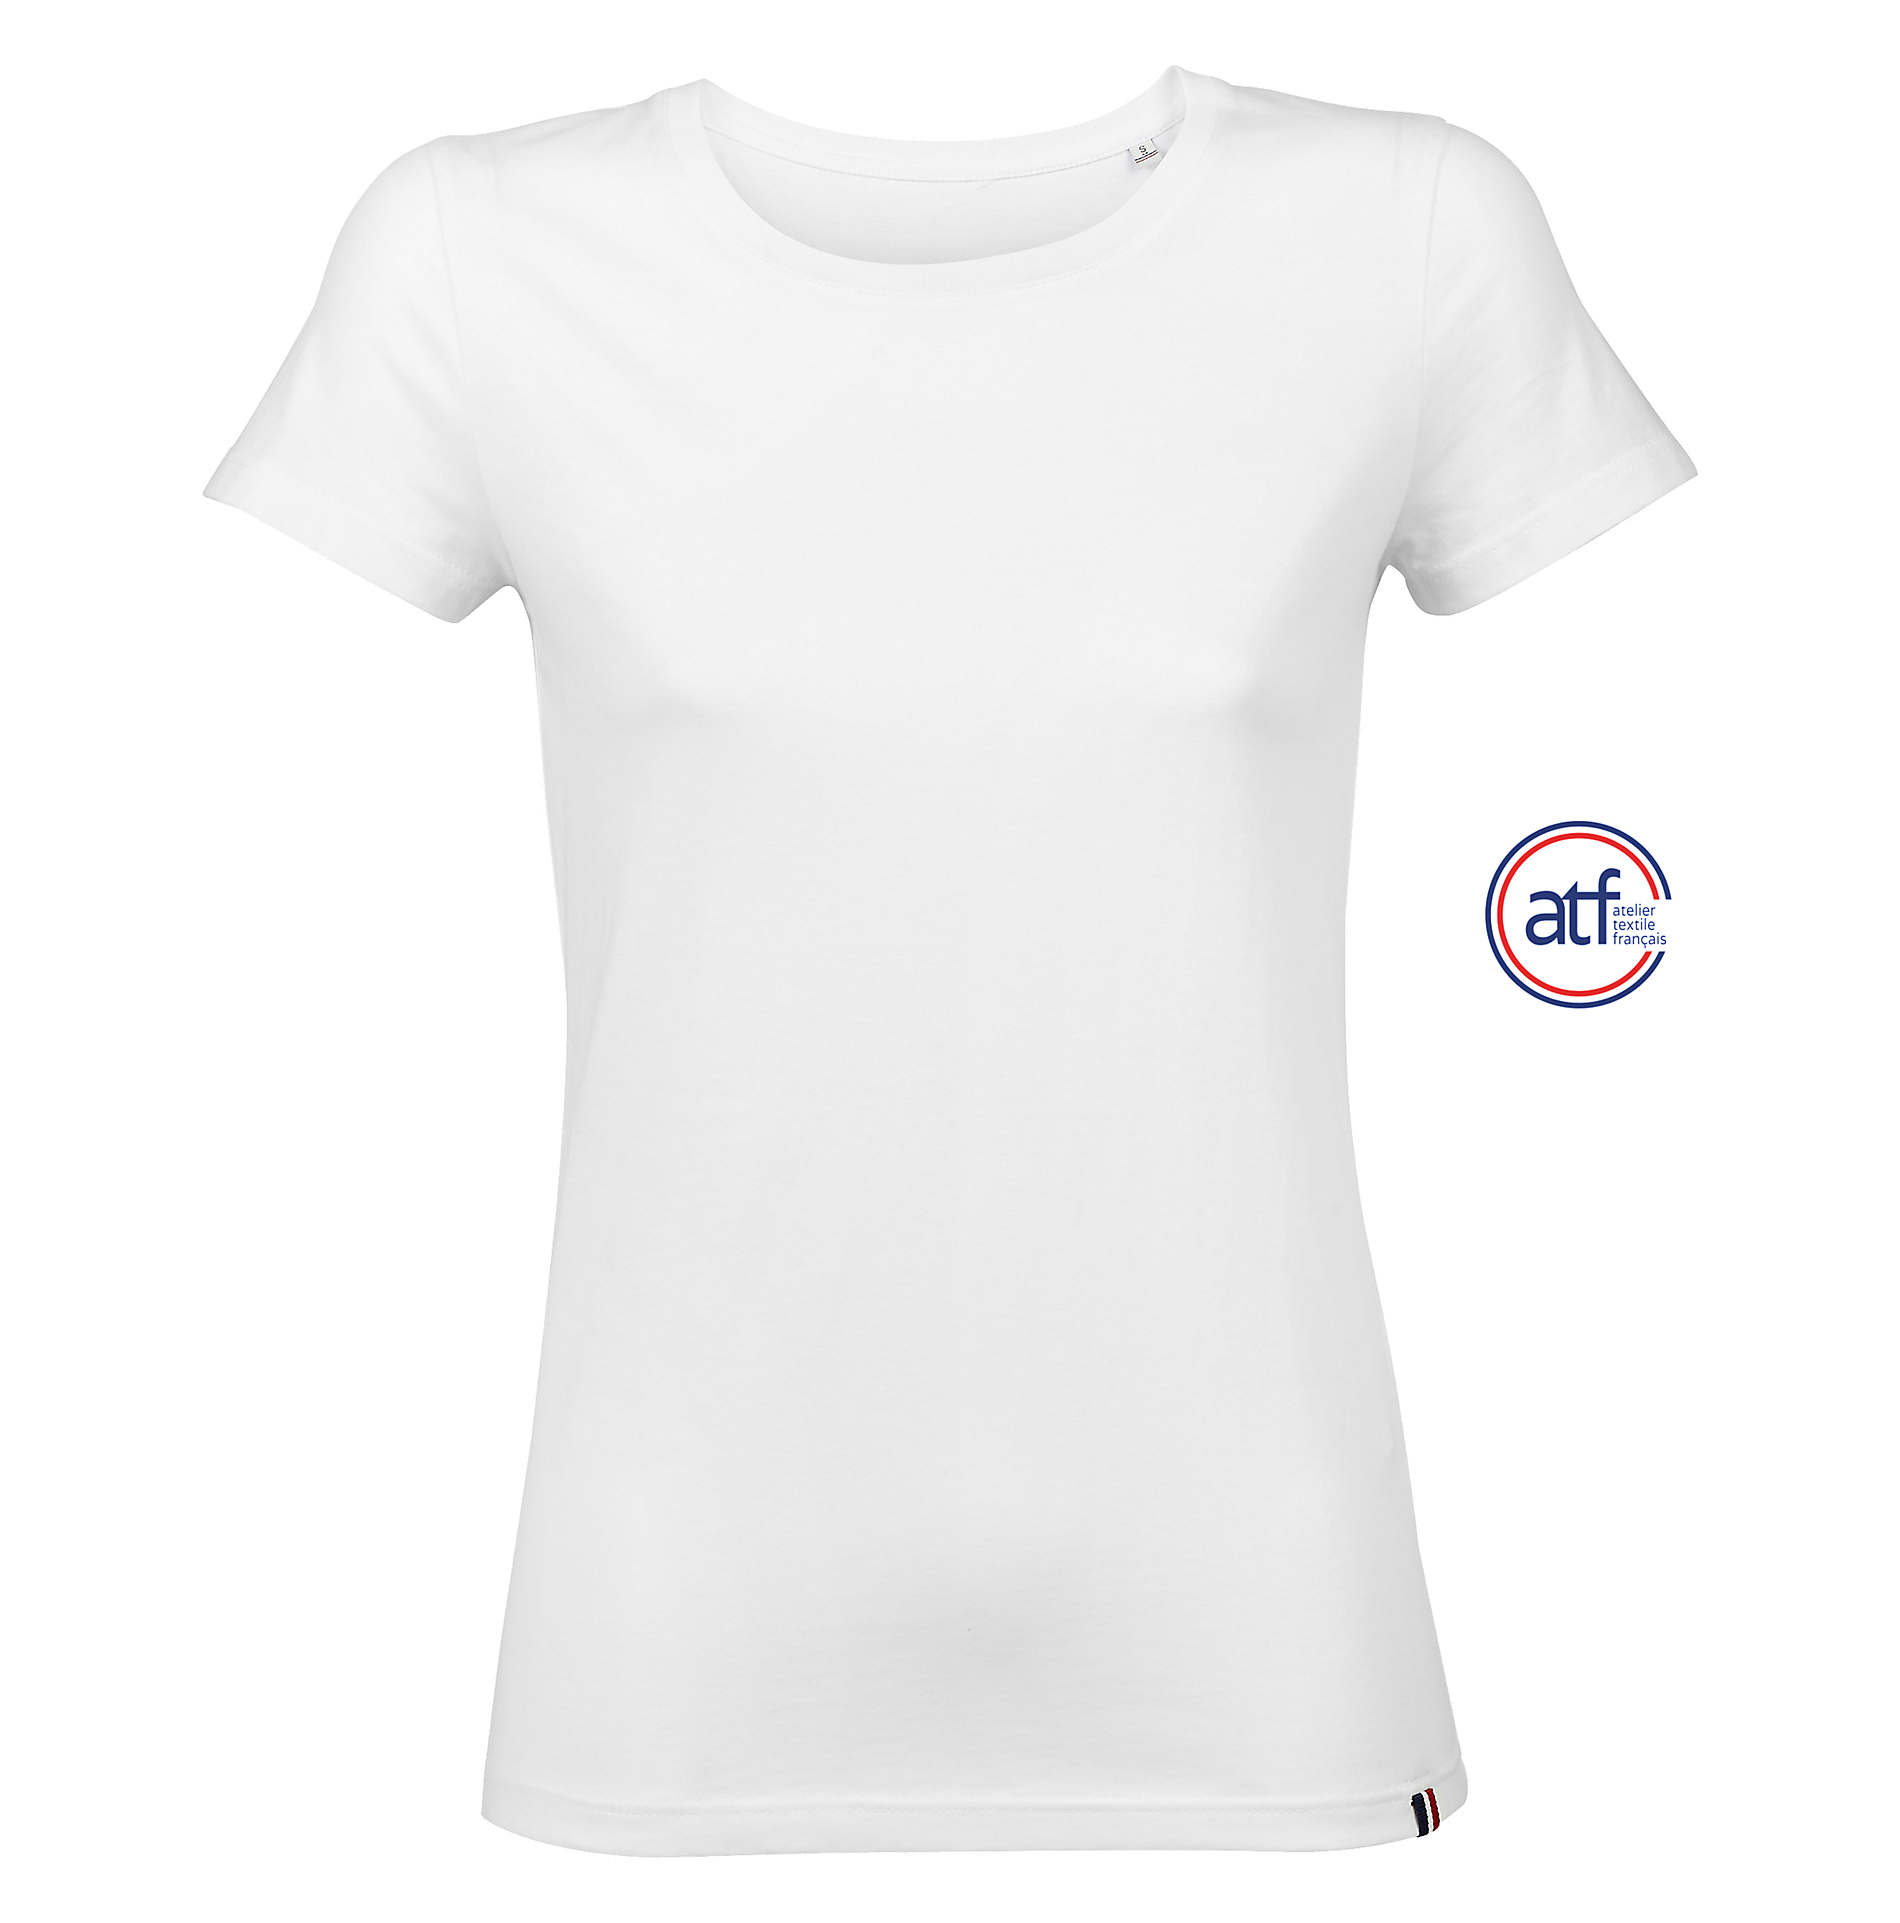 LOUISE | T-SHIRT DONNA GIROCOLLO MADE IN FRANCE